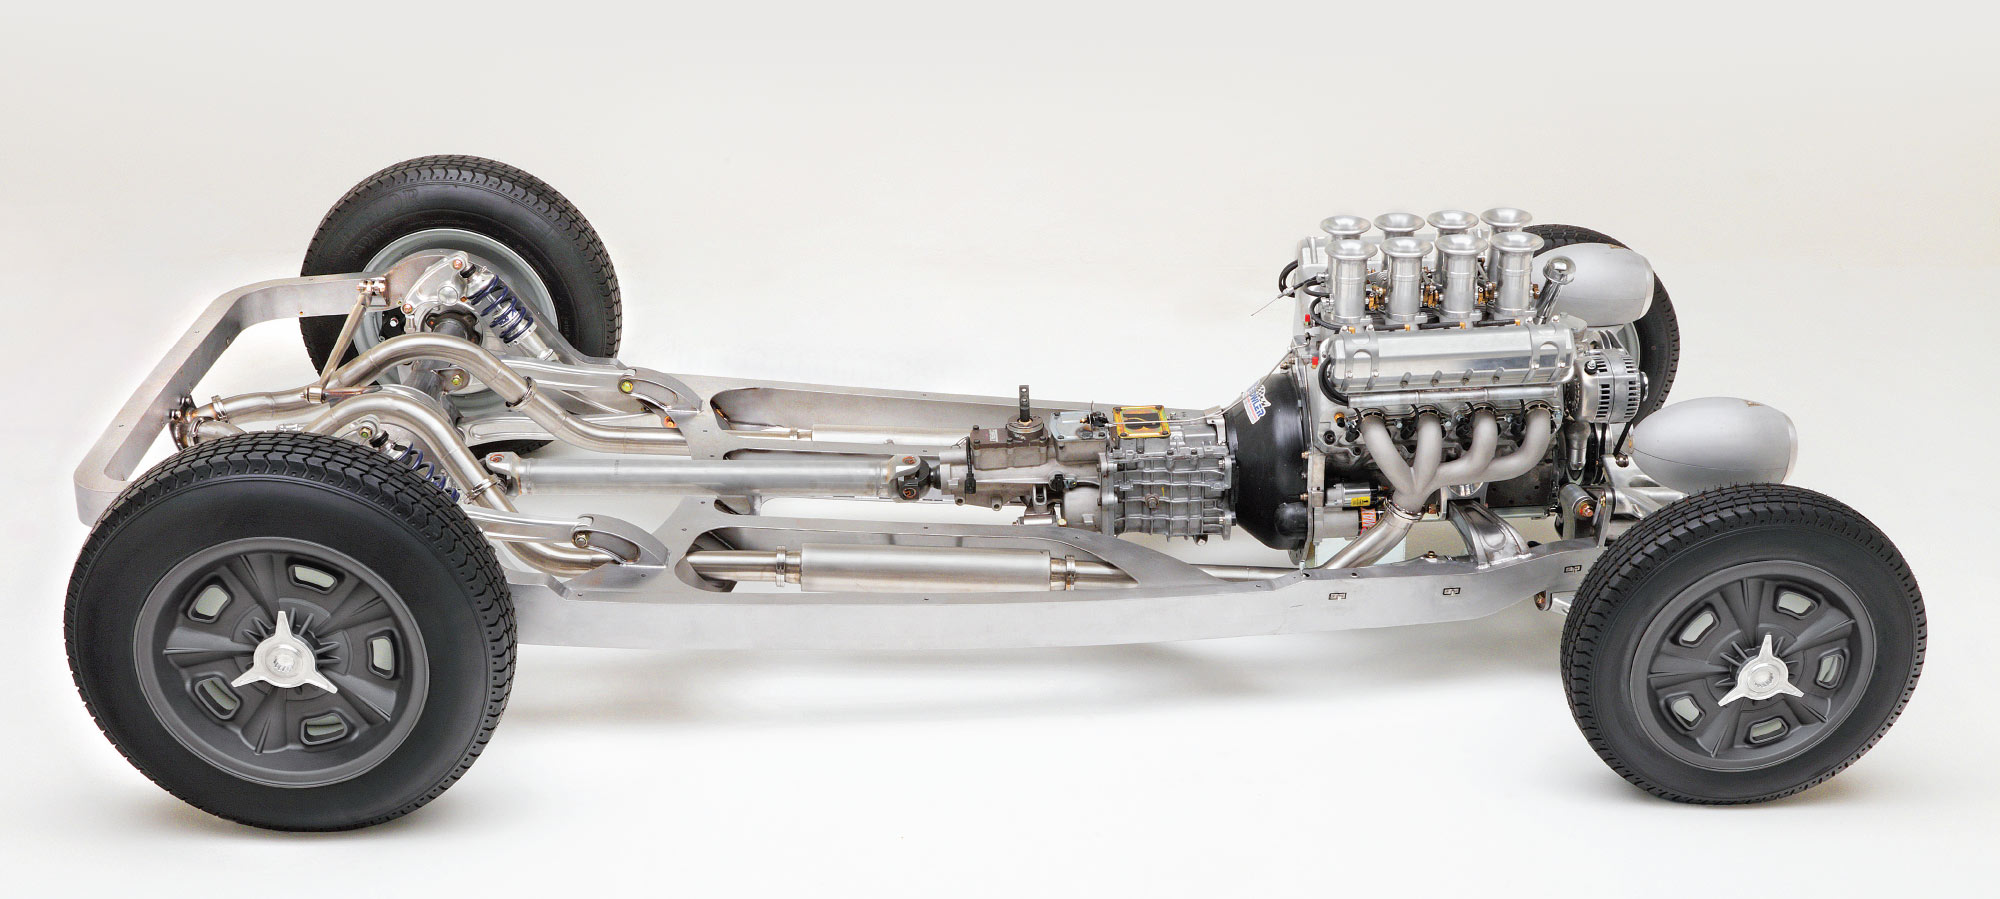 Side view of the Chevy roadster's chassis